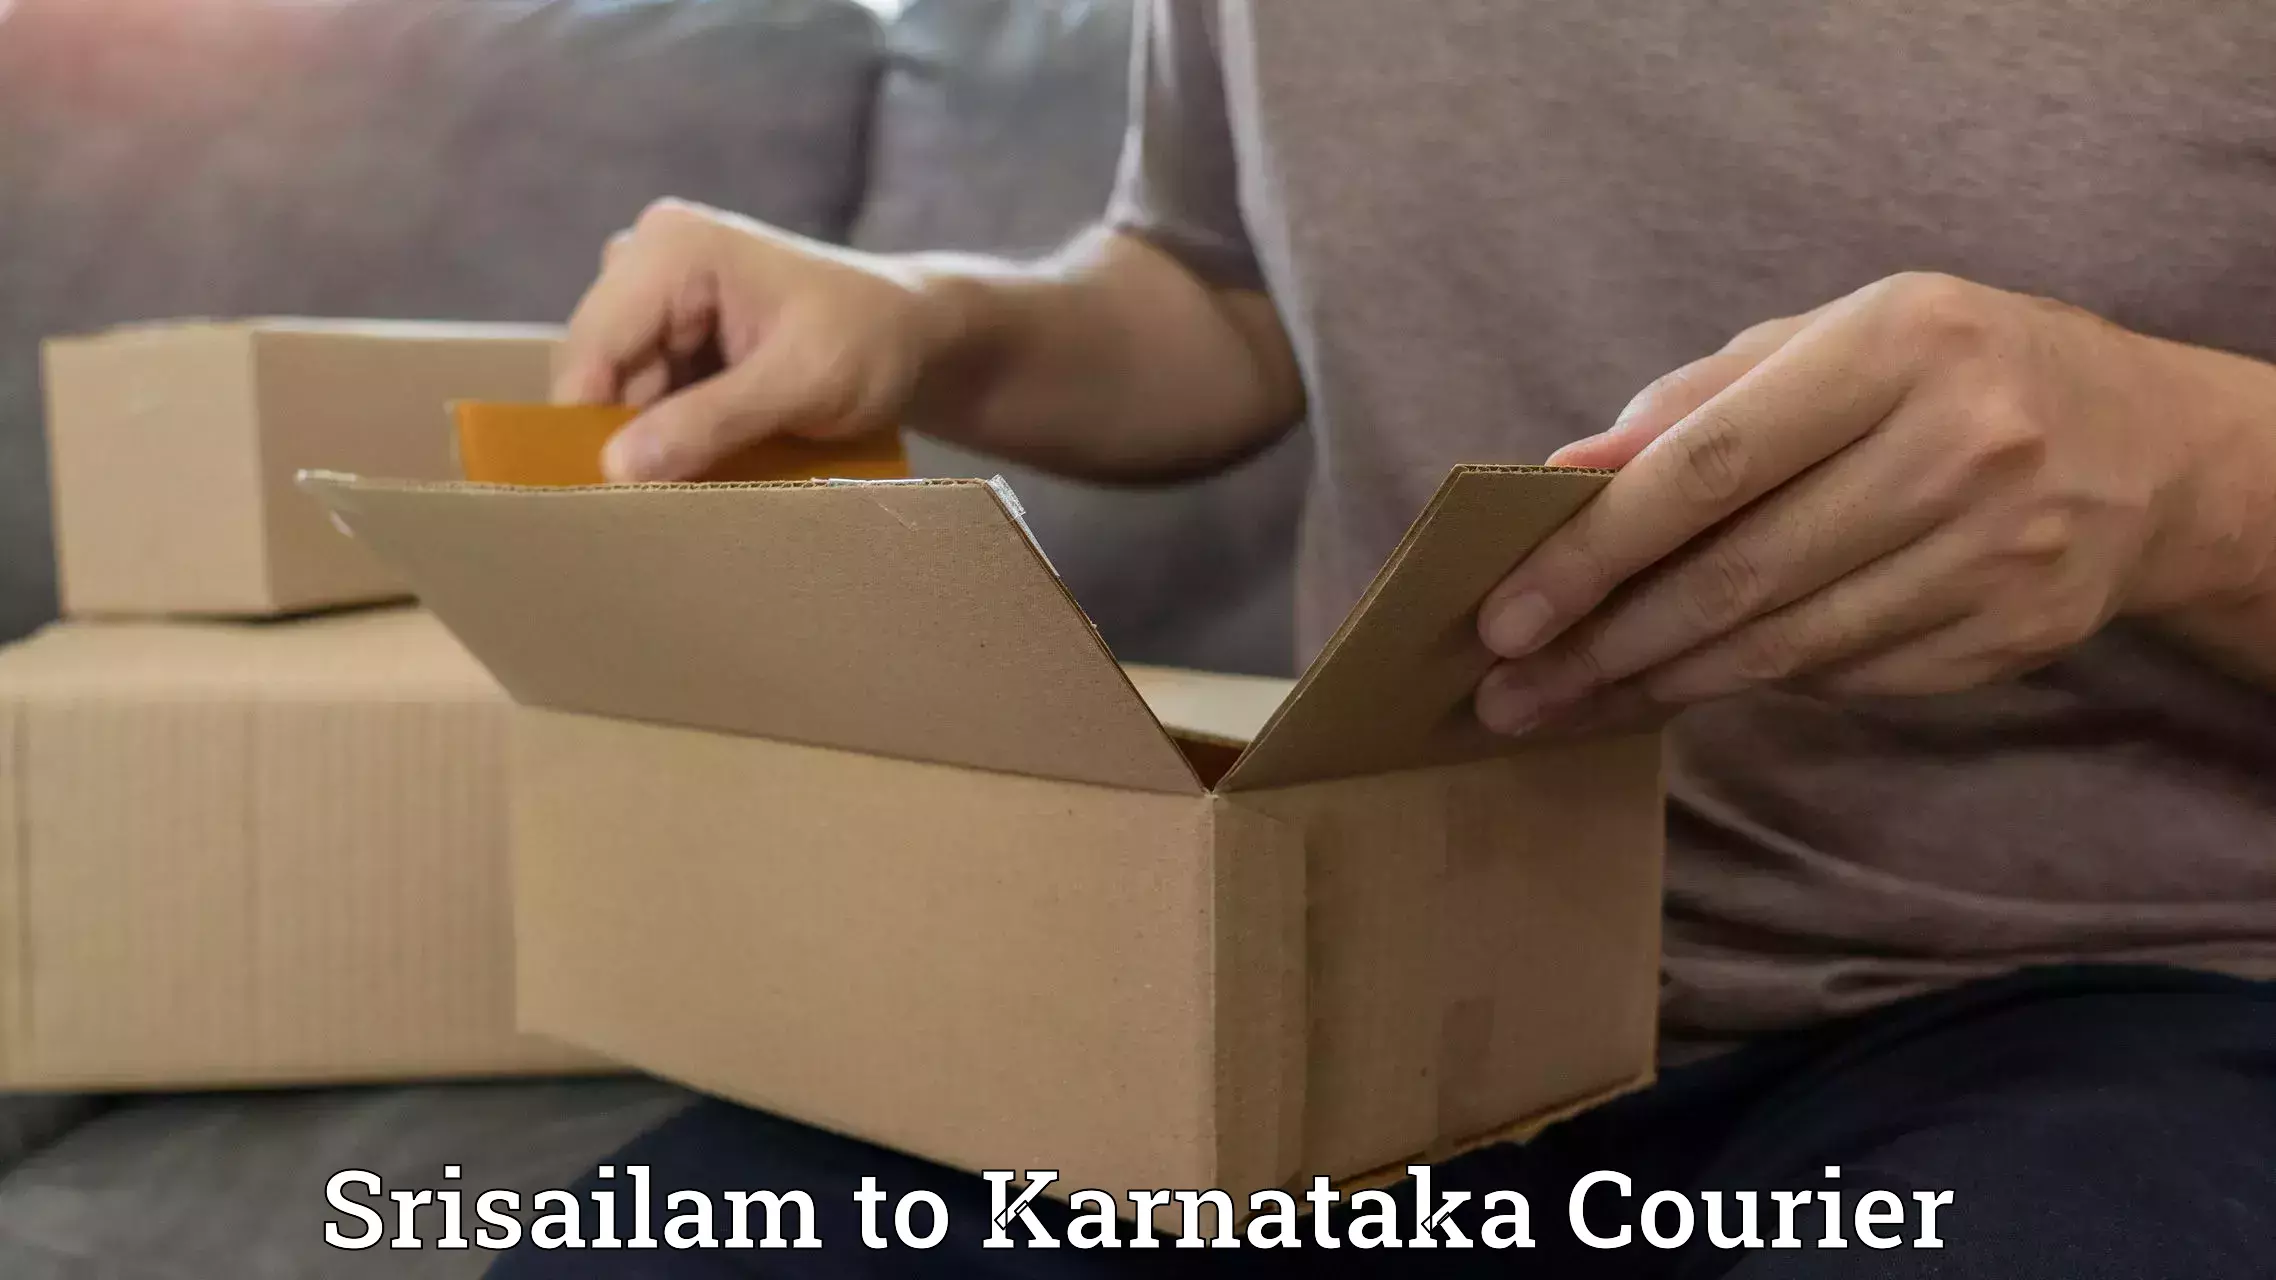 Expedited parcel delivery Srisailam to Bangalore